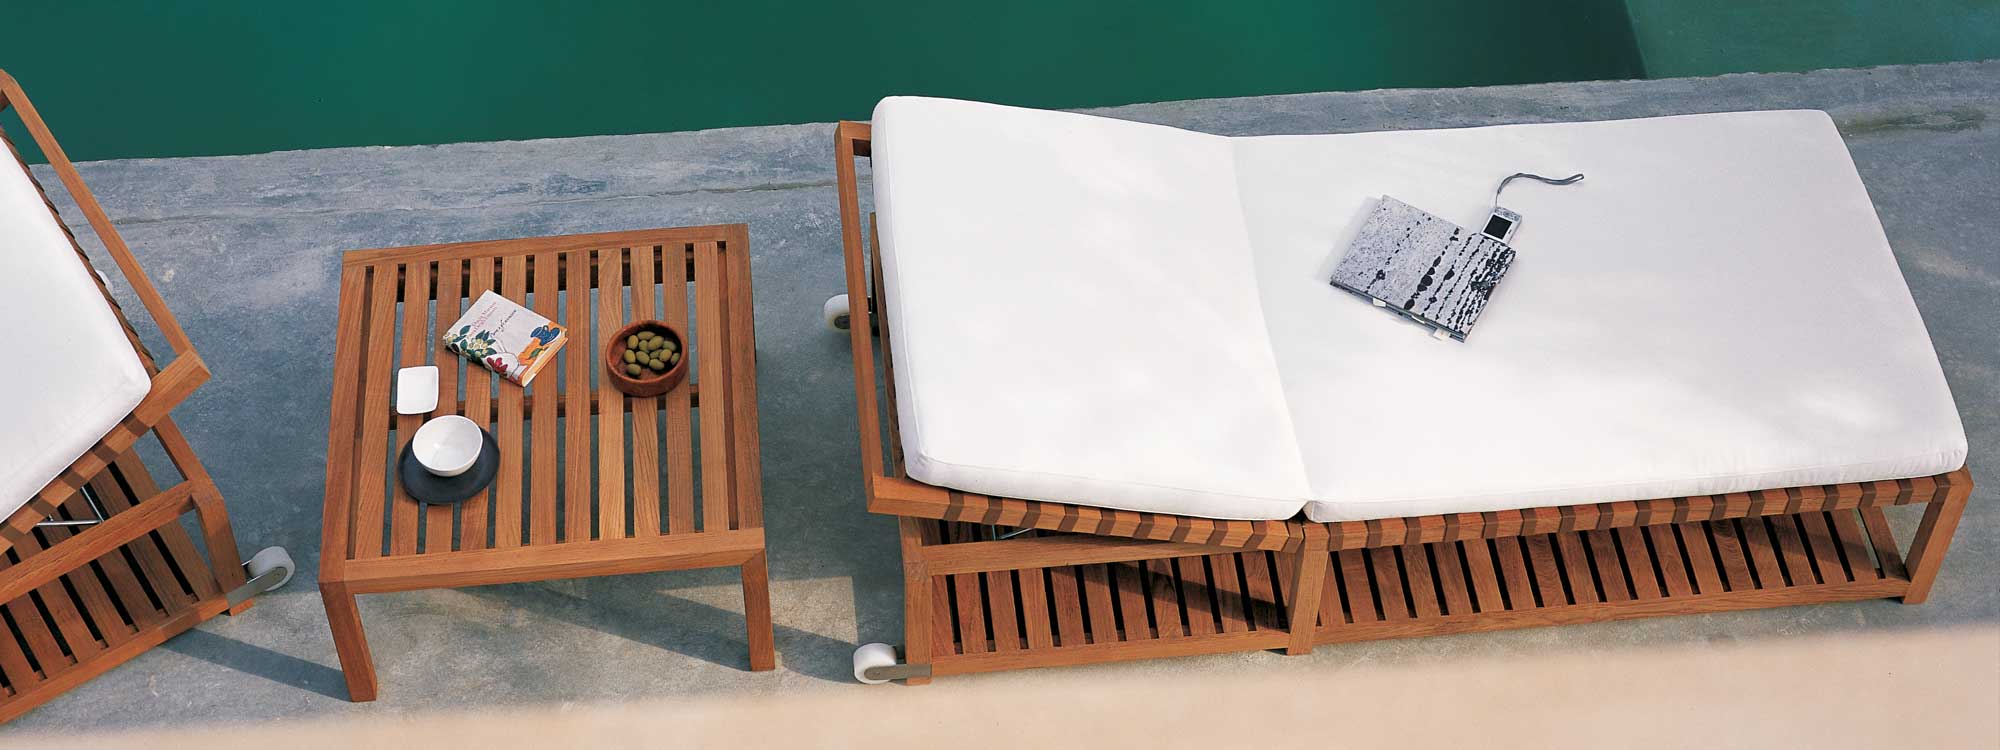 Network teak sun lounger with White cushion next to swimming pool